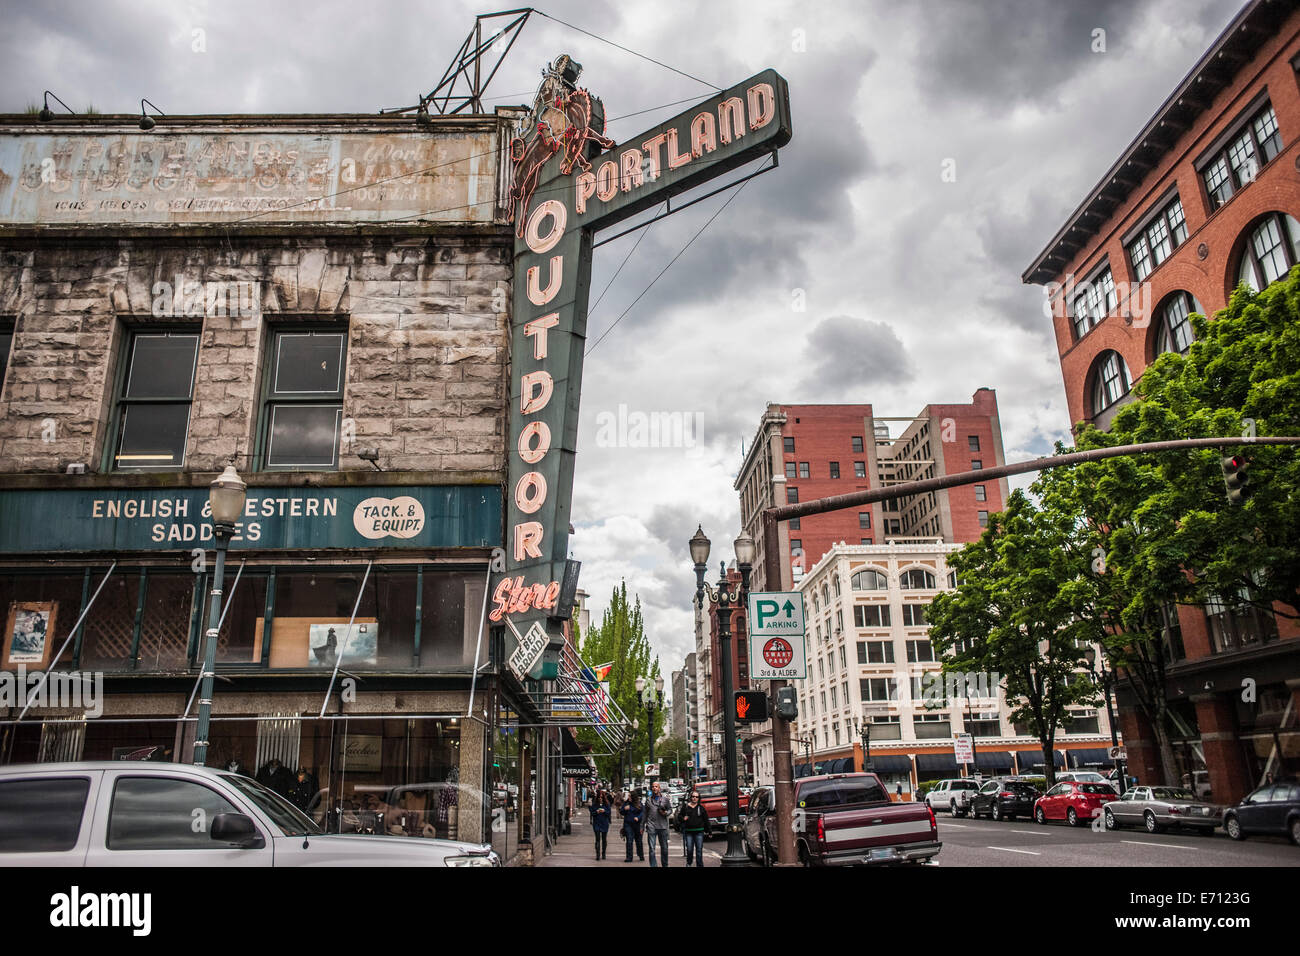 Shop sign for Outdoor Store, Portland, Oregon, US Stock Photo